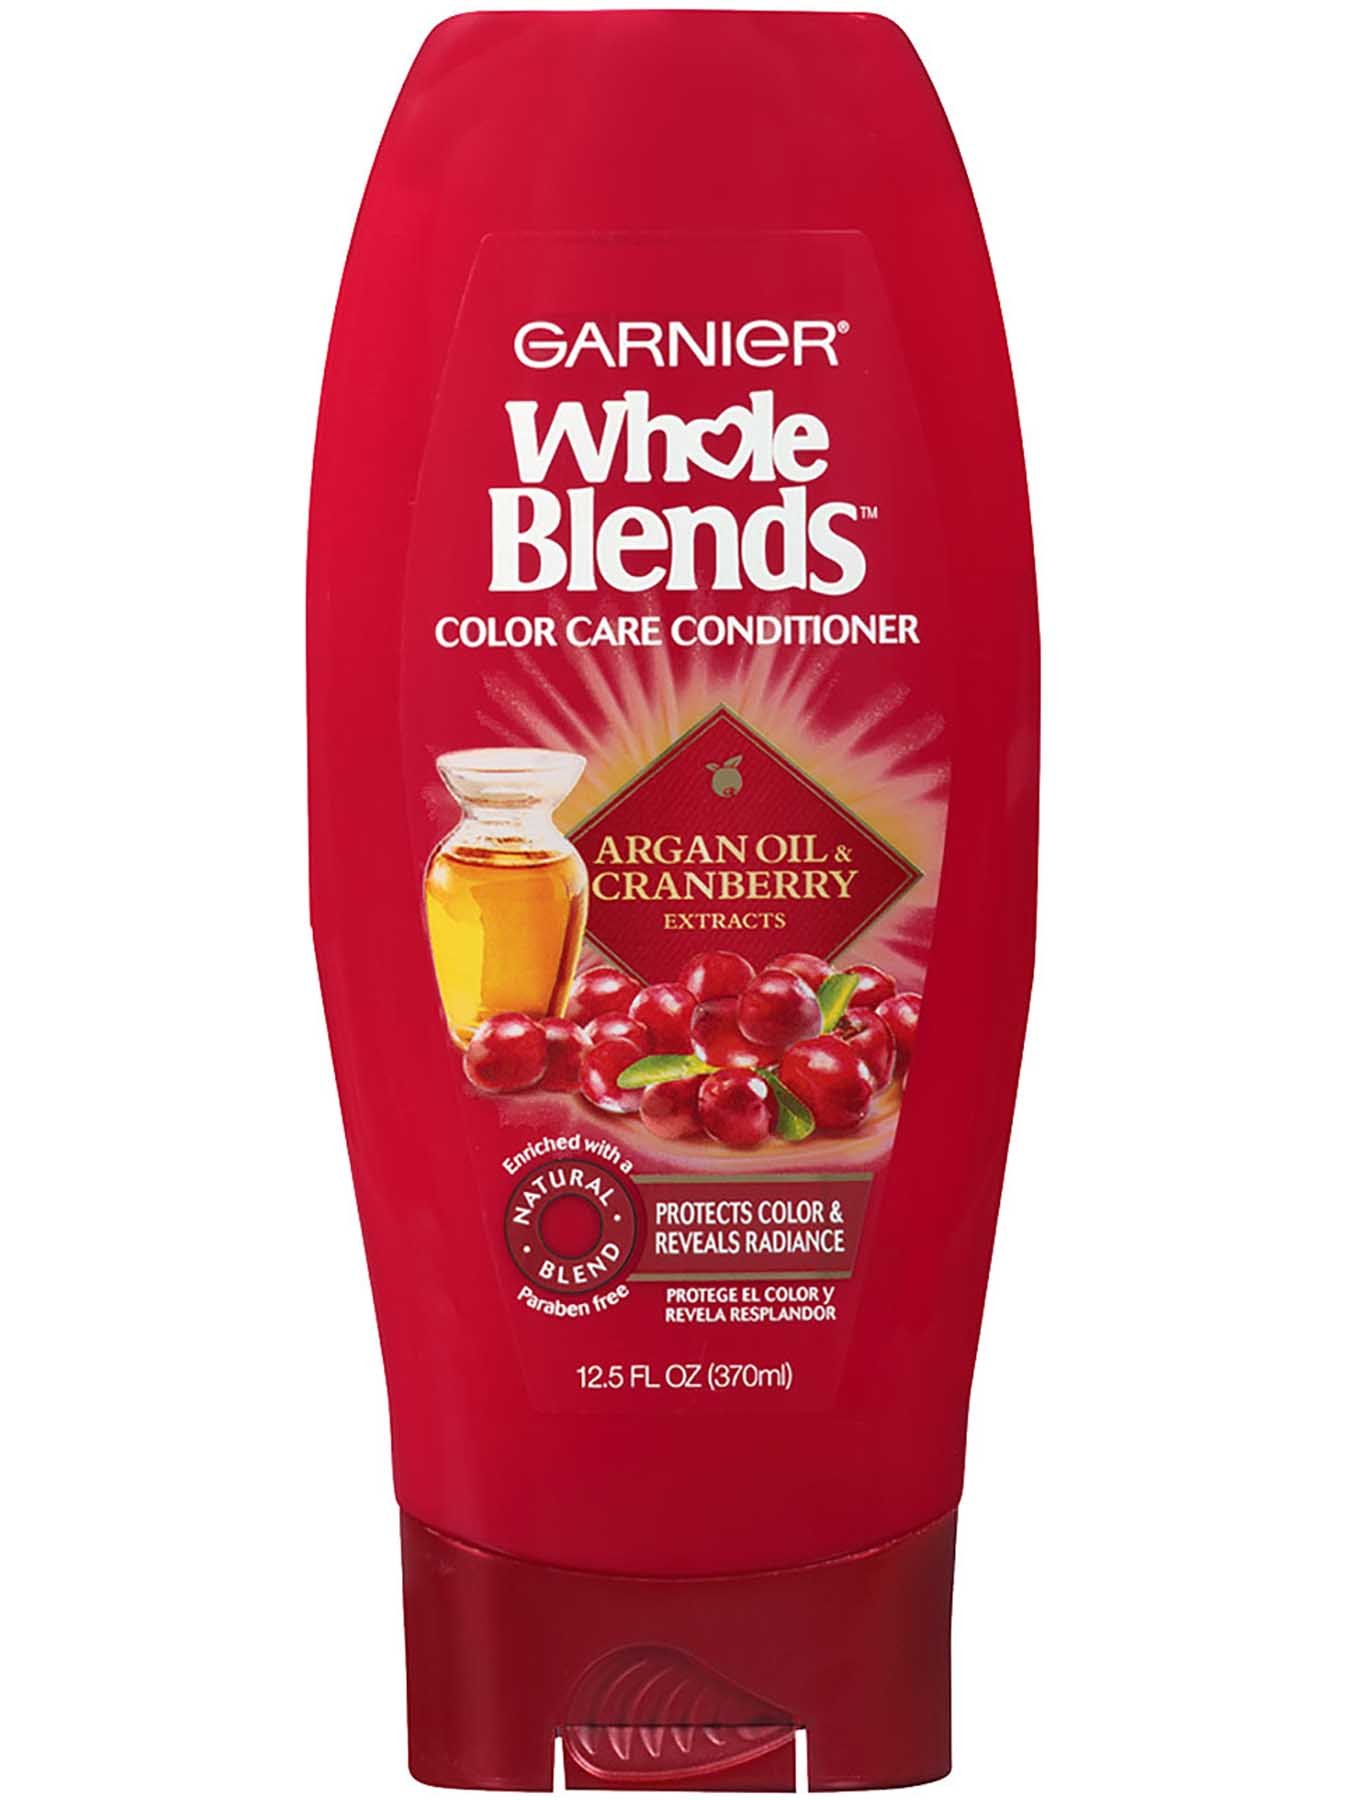 Front view of Color Care Conditioner with Argan Oil and Cranberry Extracts.